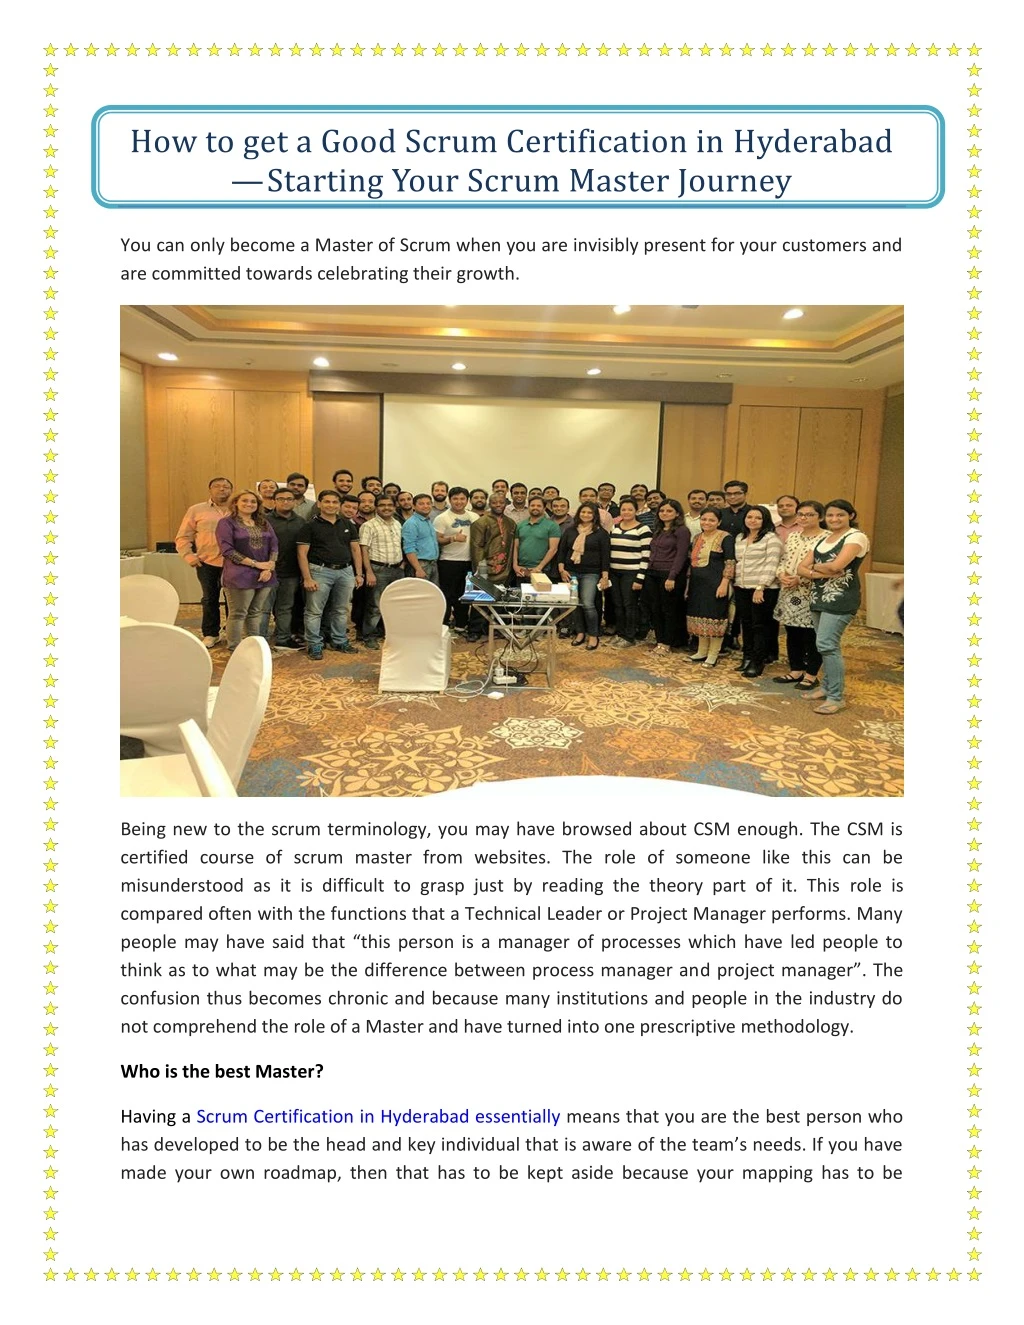 how to get a good scrum certification